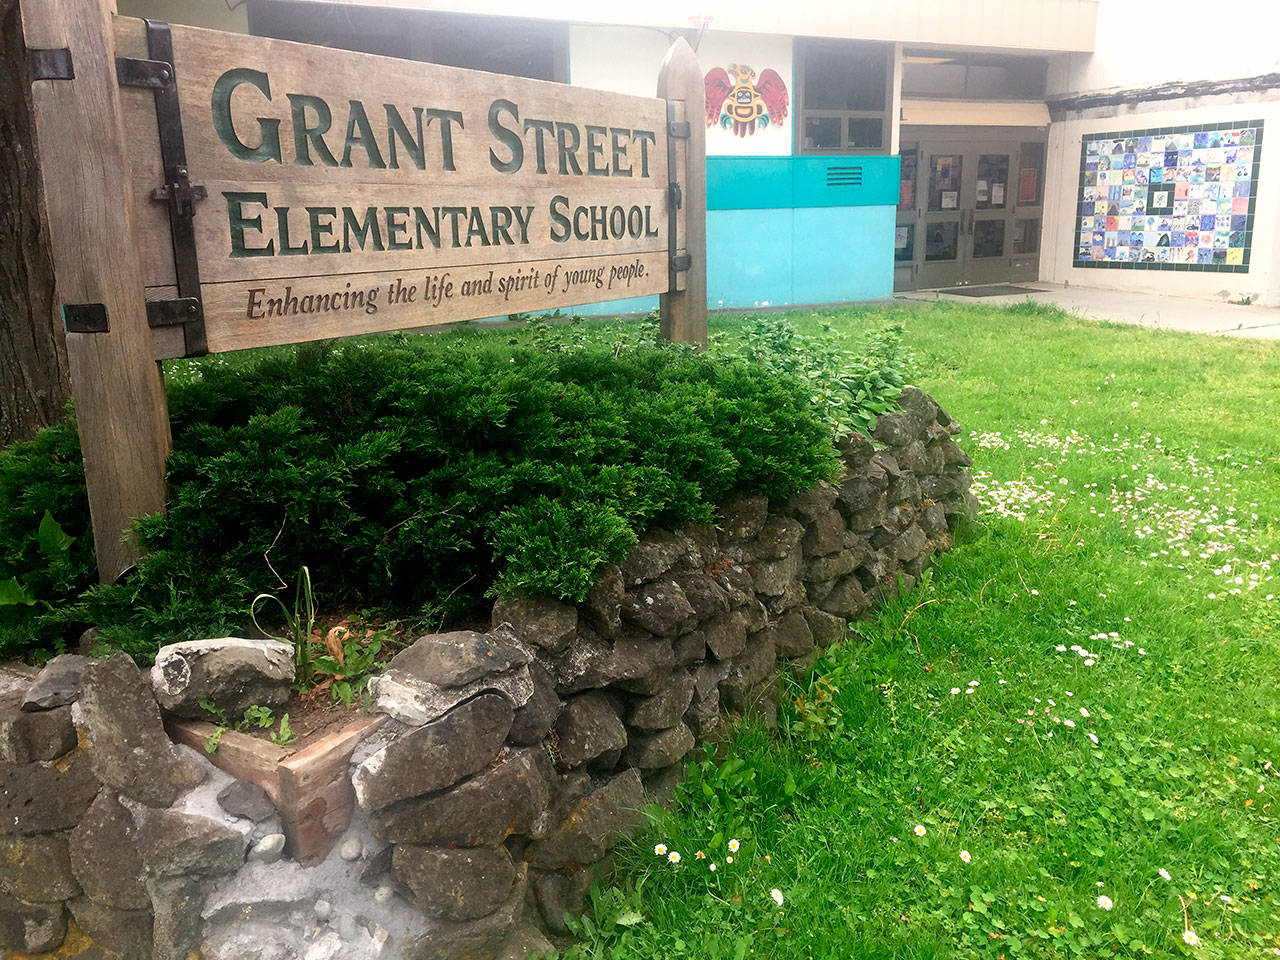 Grant Street Elementary School will be replaced by the new and larger Salish Coast Elementary after it opens for the 2018-19 school year. (Cydney McFarland/Peninsula Daily News)